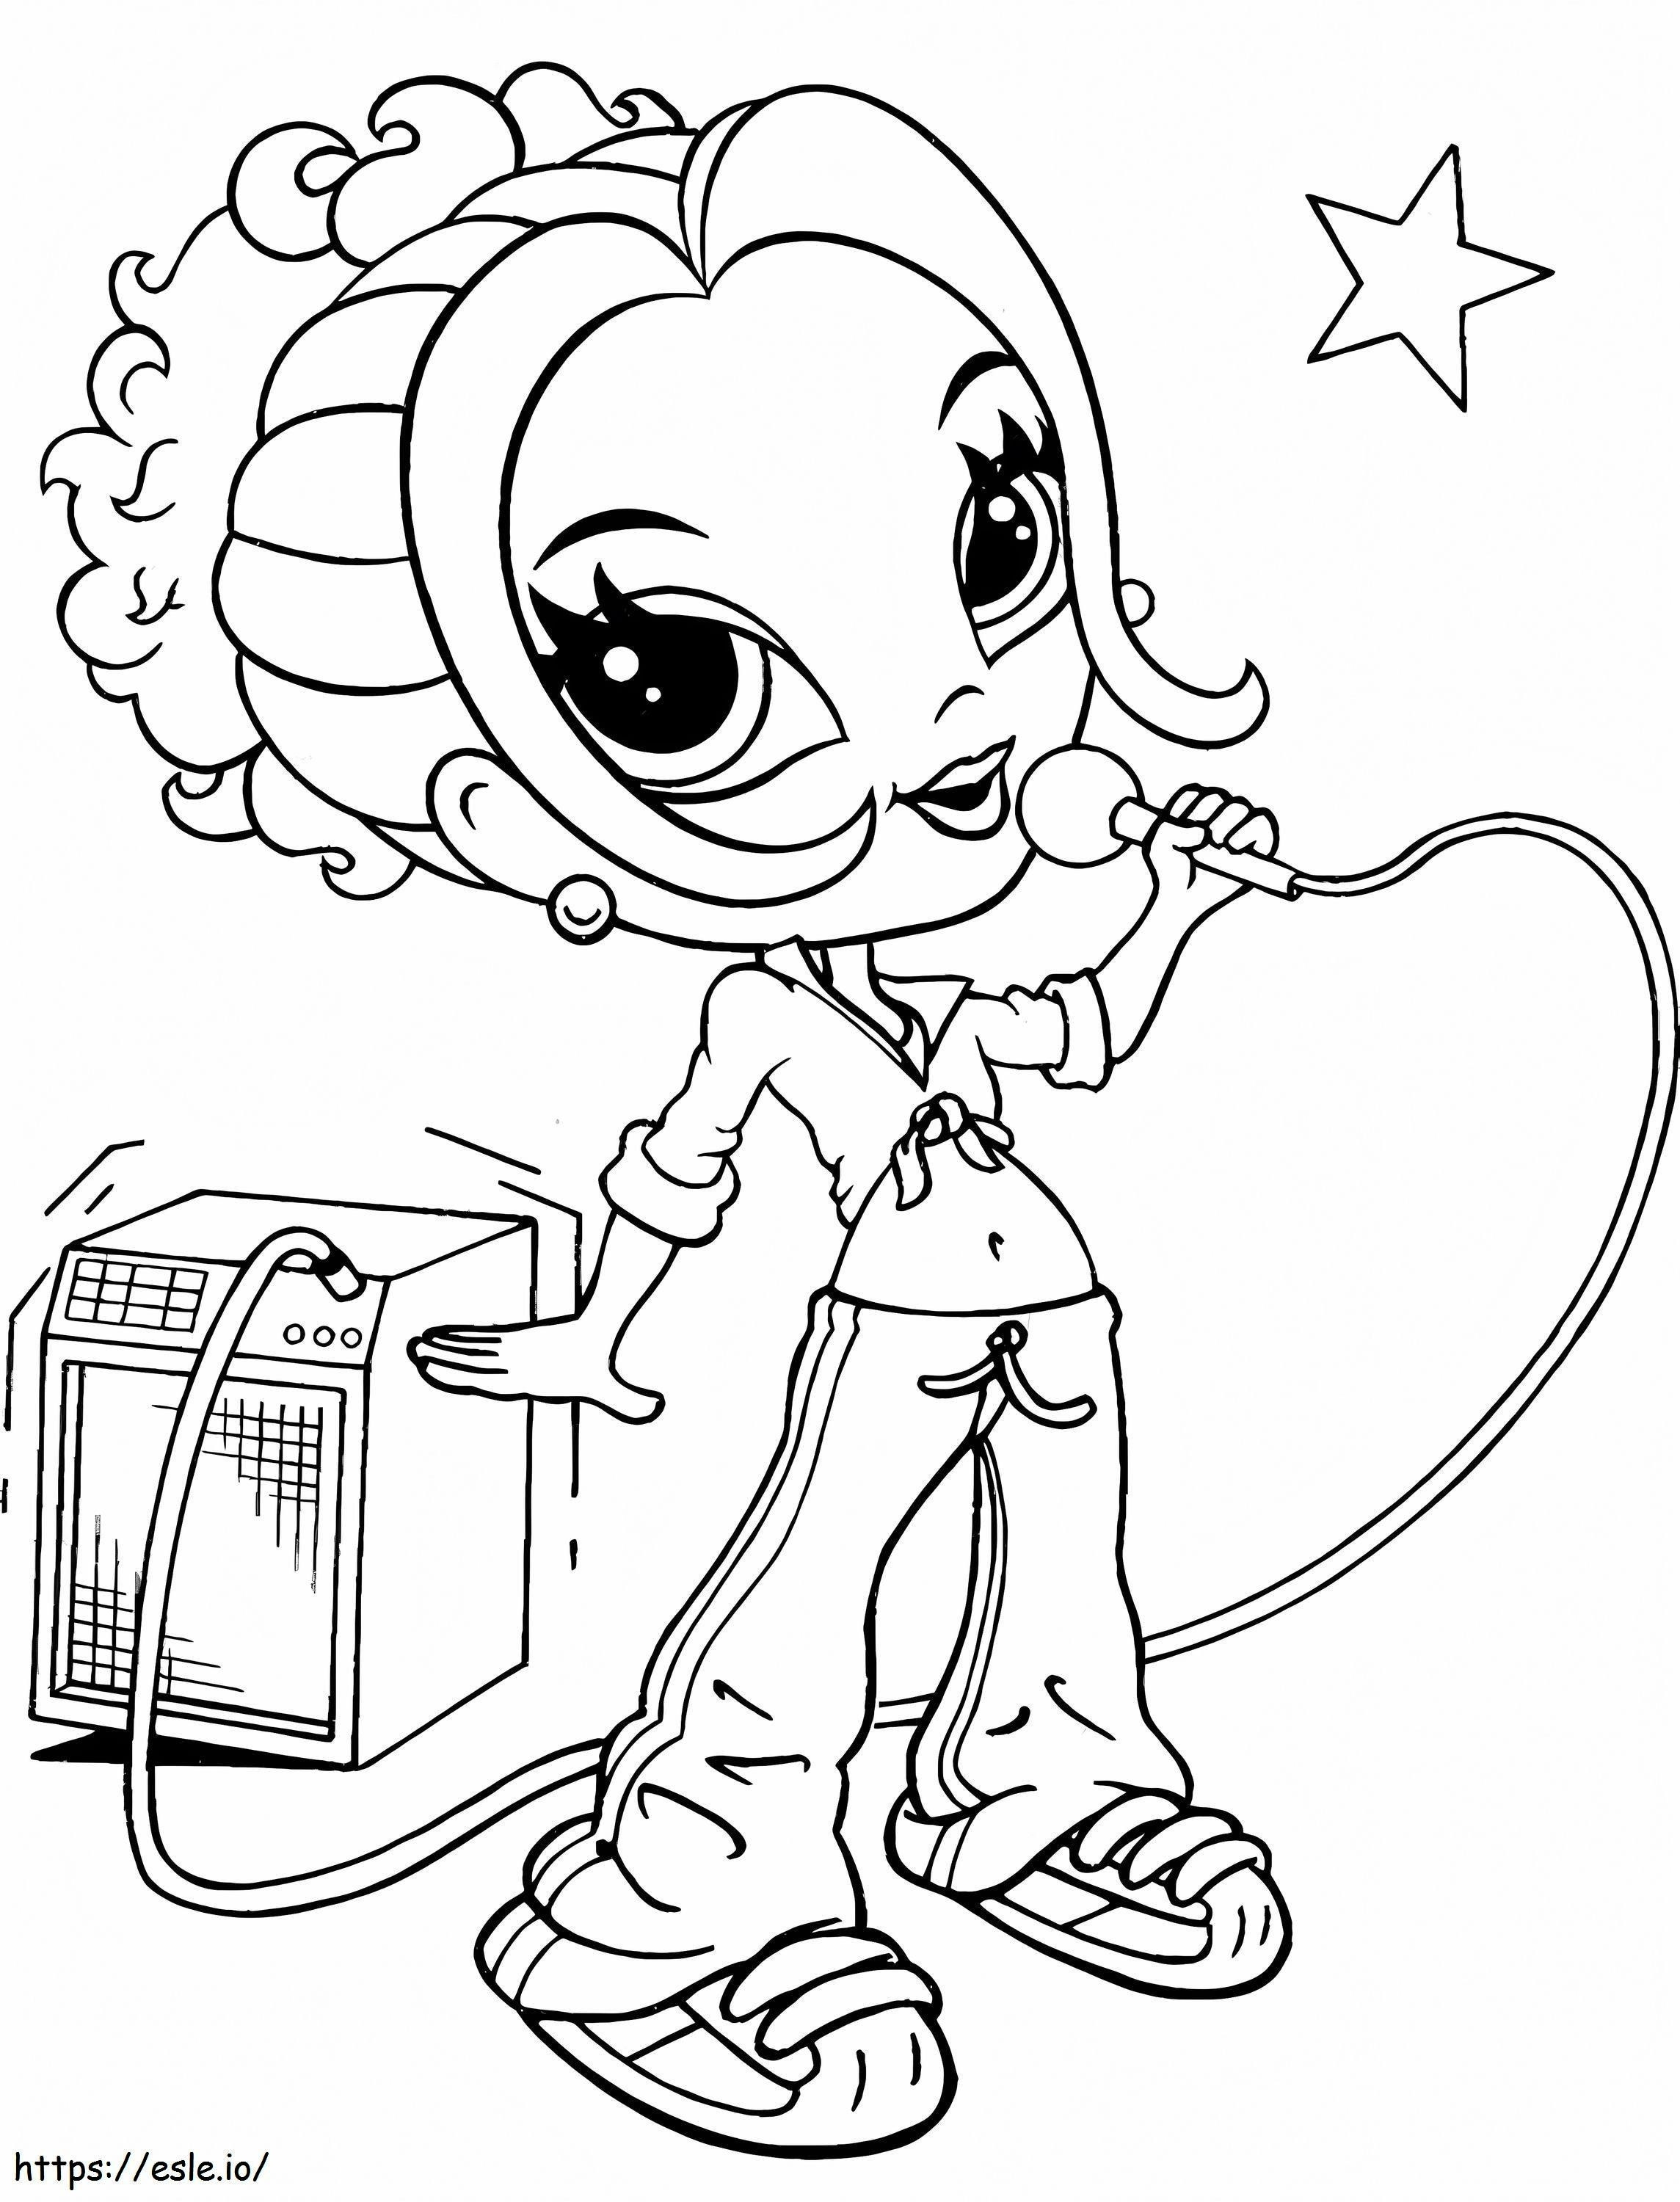 1566459960 Glamour Girl Singing A4 coloring page